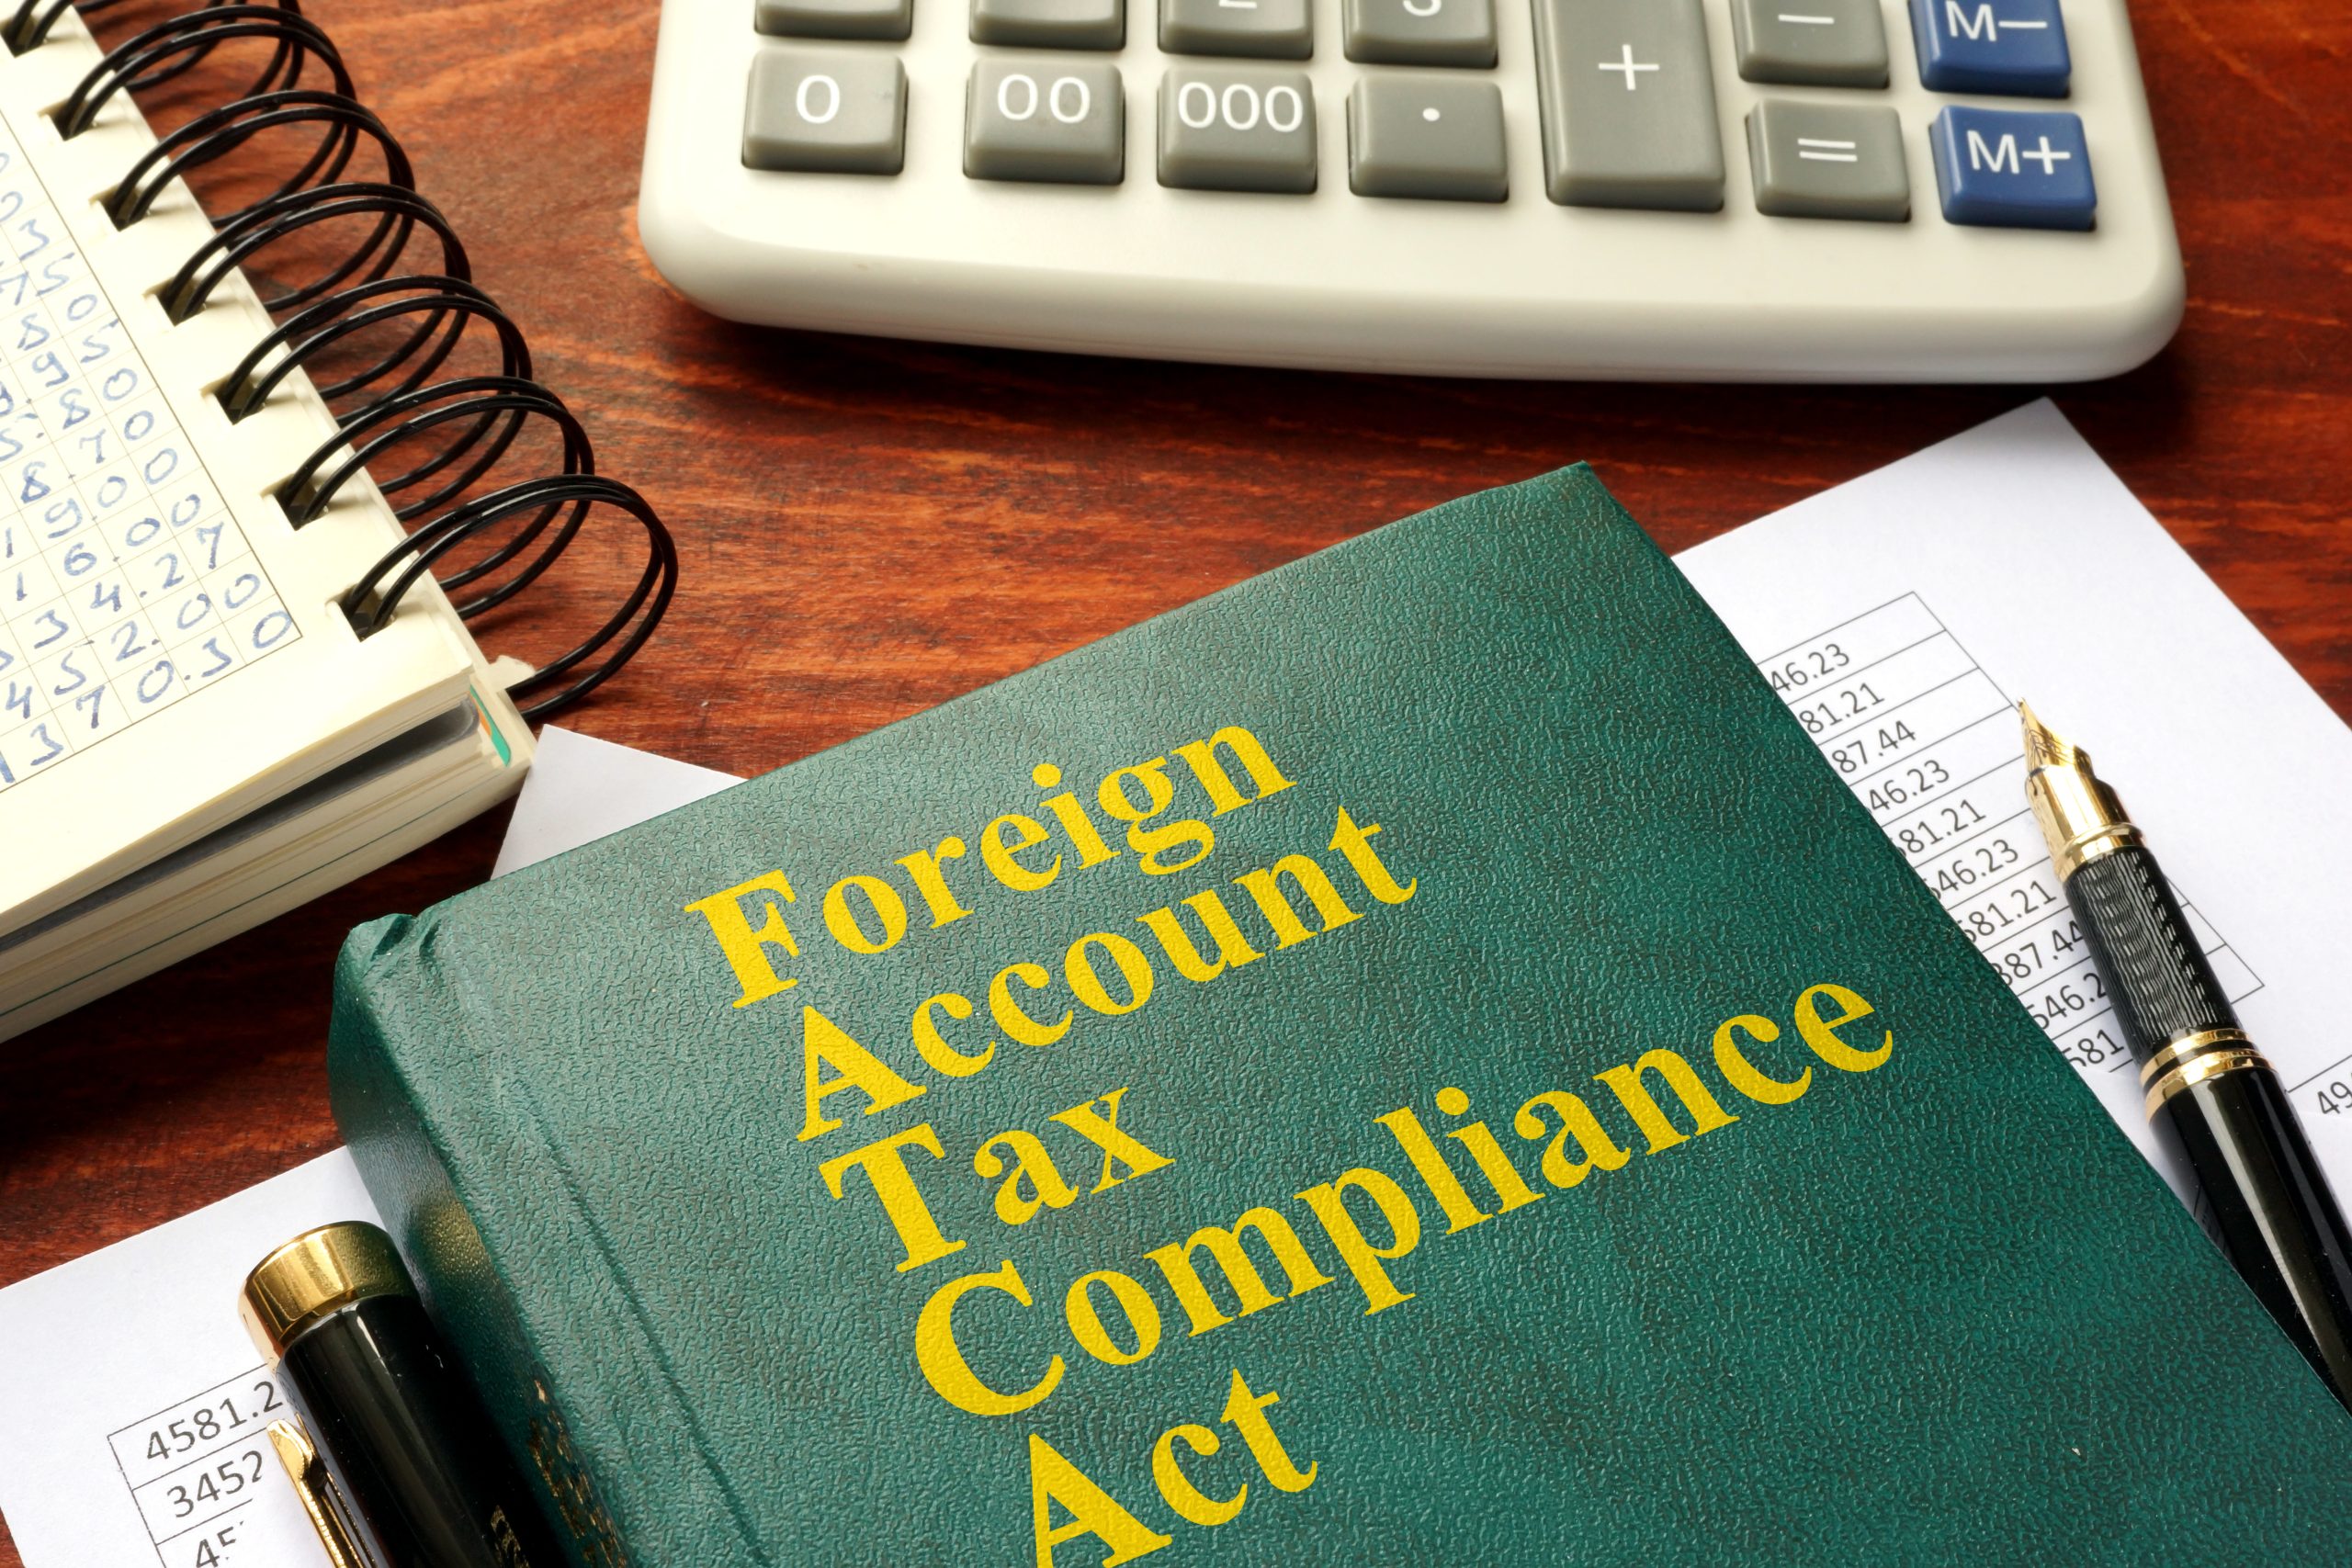 Foreign Account Tax Compliance Act